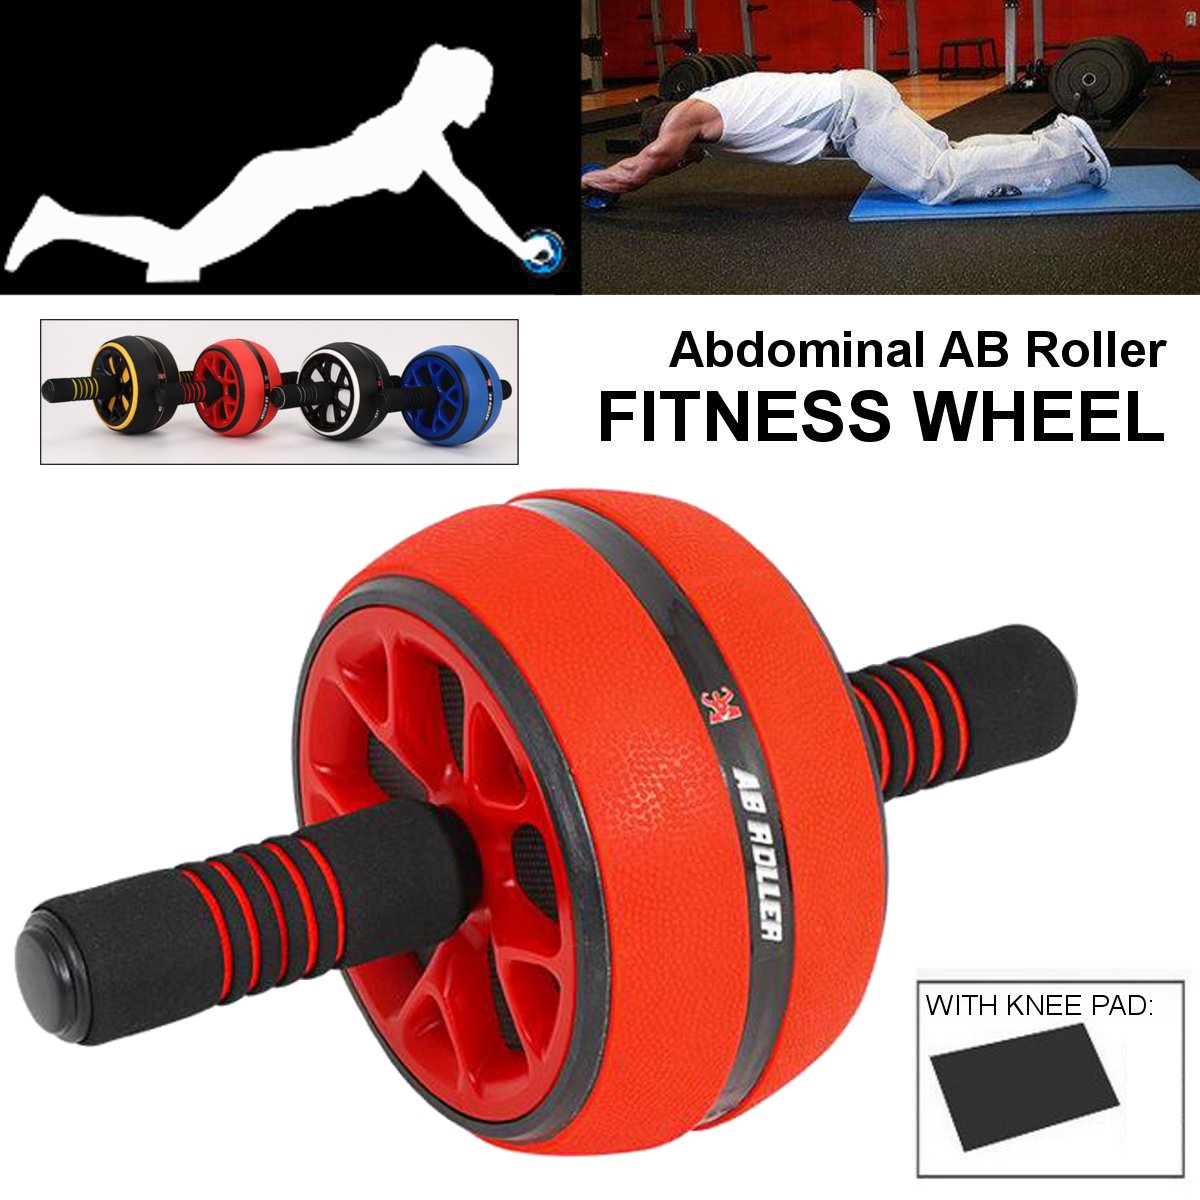 1PC-Wider-Ab-Roller-Wheel-With-Knee-Pad-for-Core-Training-Abdominal-Workout-Fitness-Exercise-Tools-1669168-2